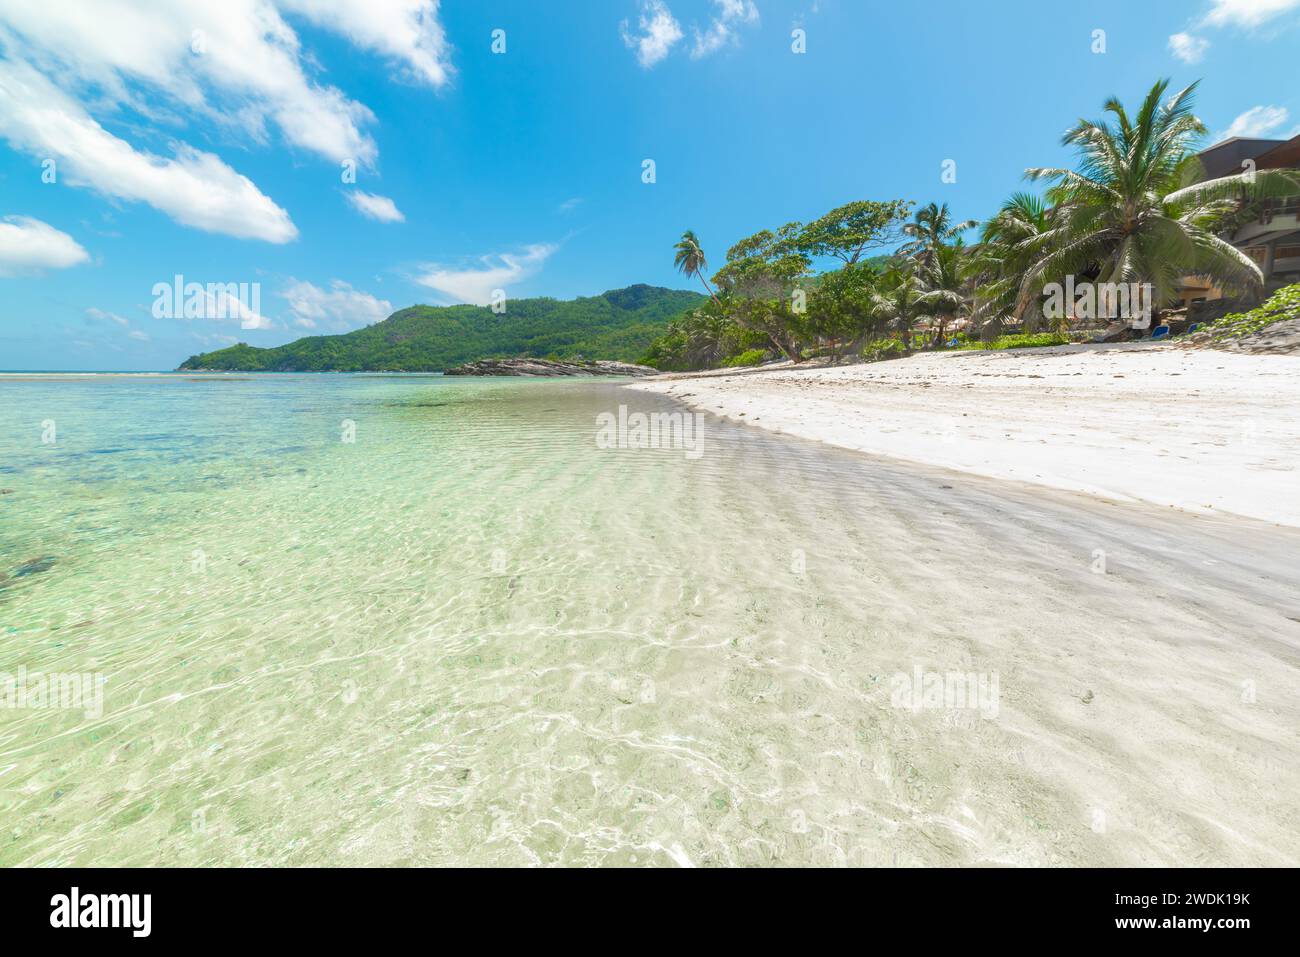 Anse Forbans under a blue sky with clouds. Mahe island, Seychelles Stock Photo